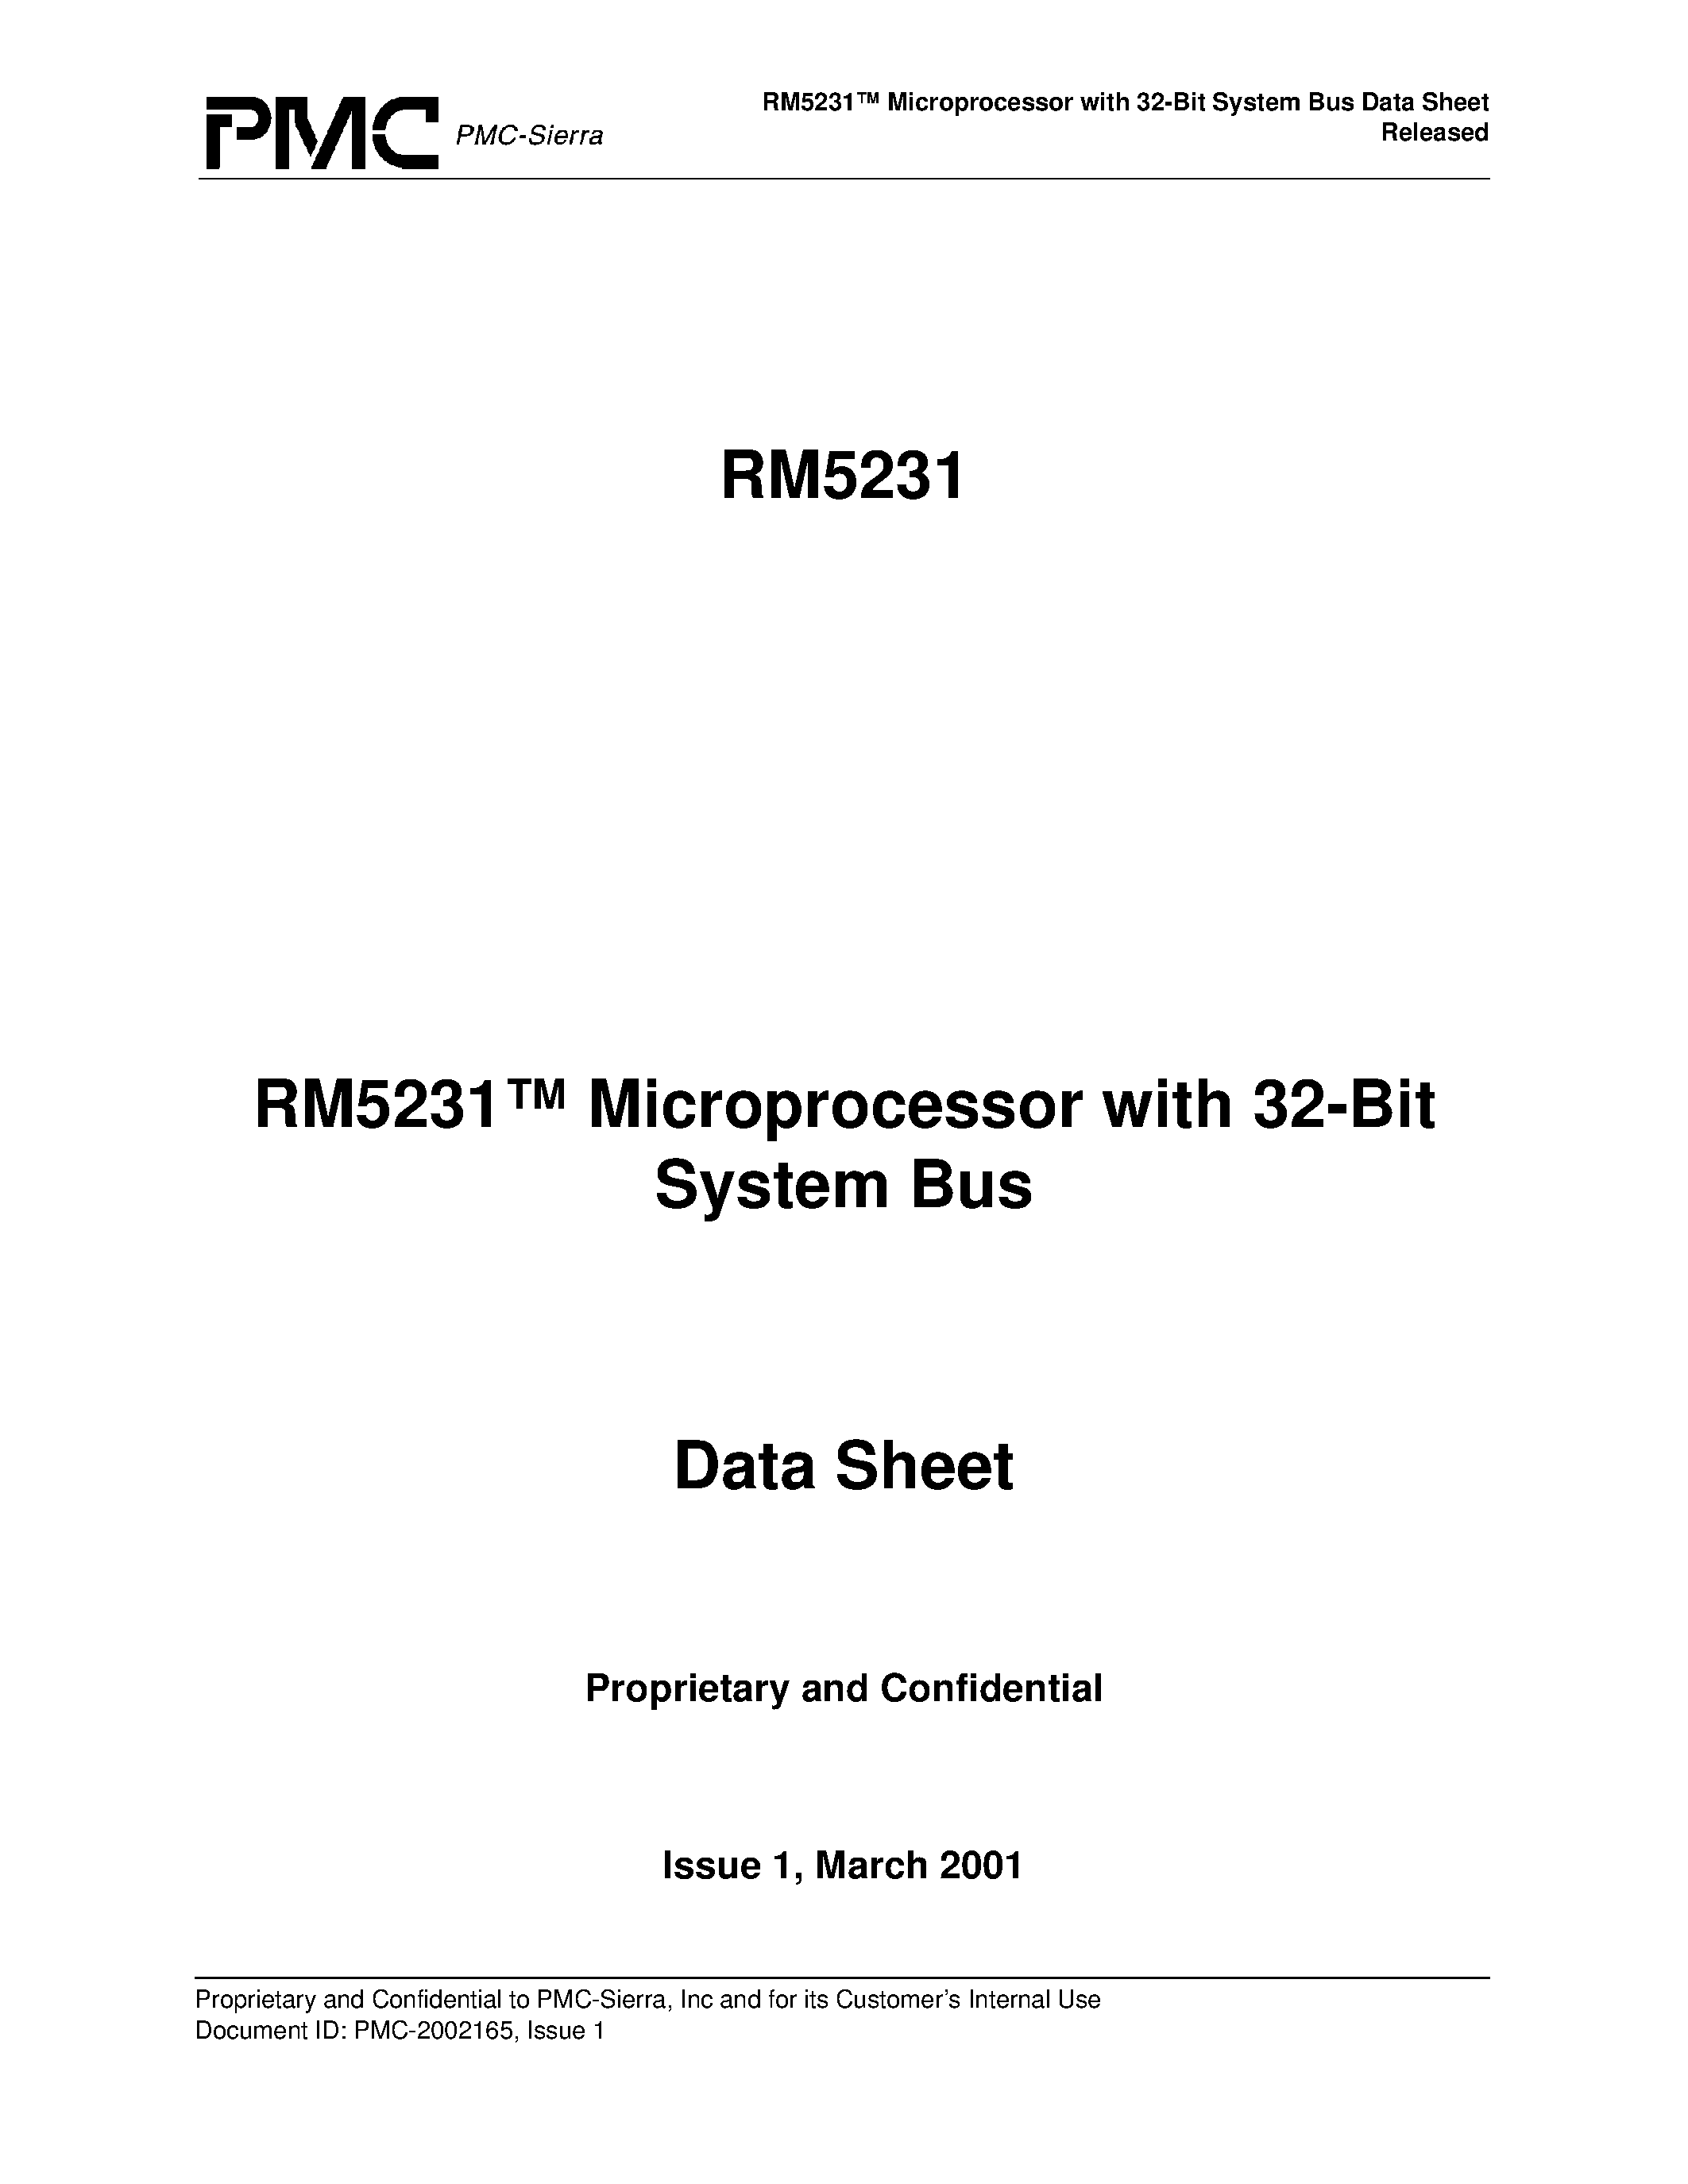 Даташит RM5231-250-Q - RM5231 Microprocessor with 32-Bit System Bus Data Sheet Released страница 1